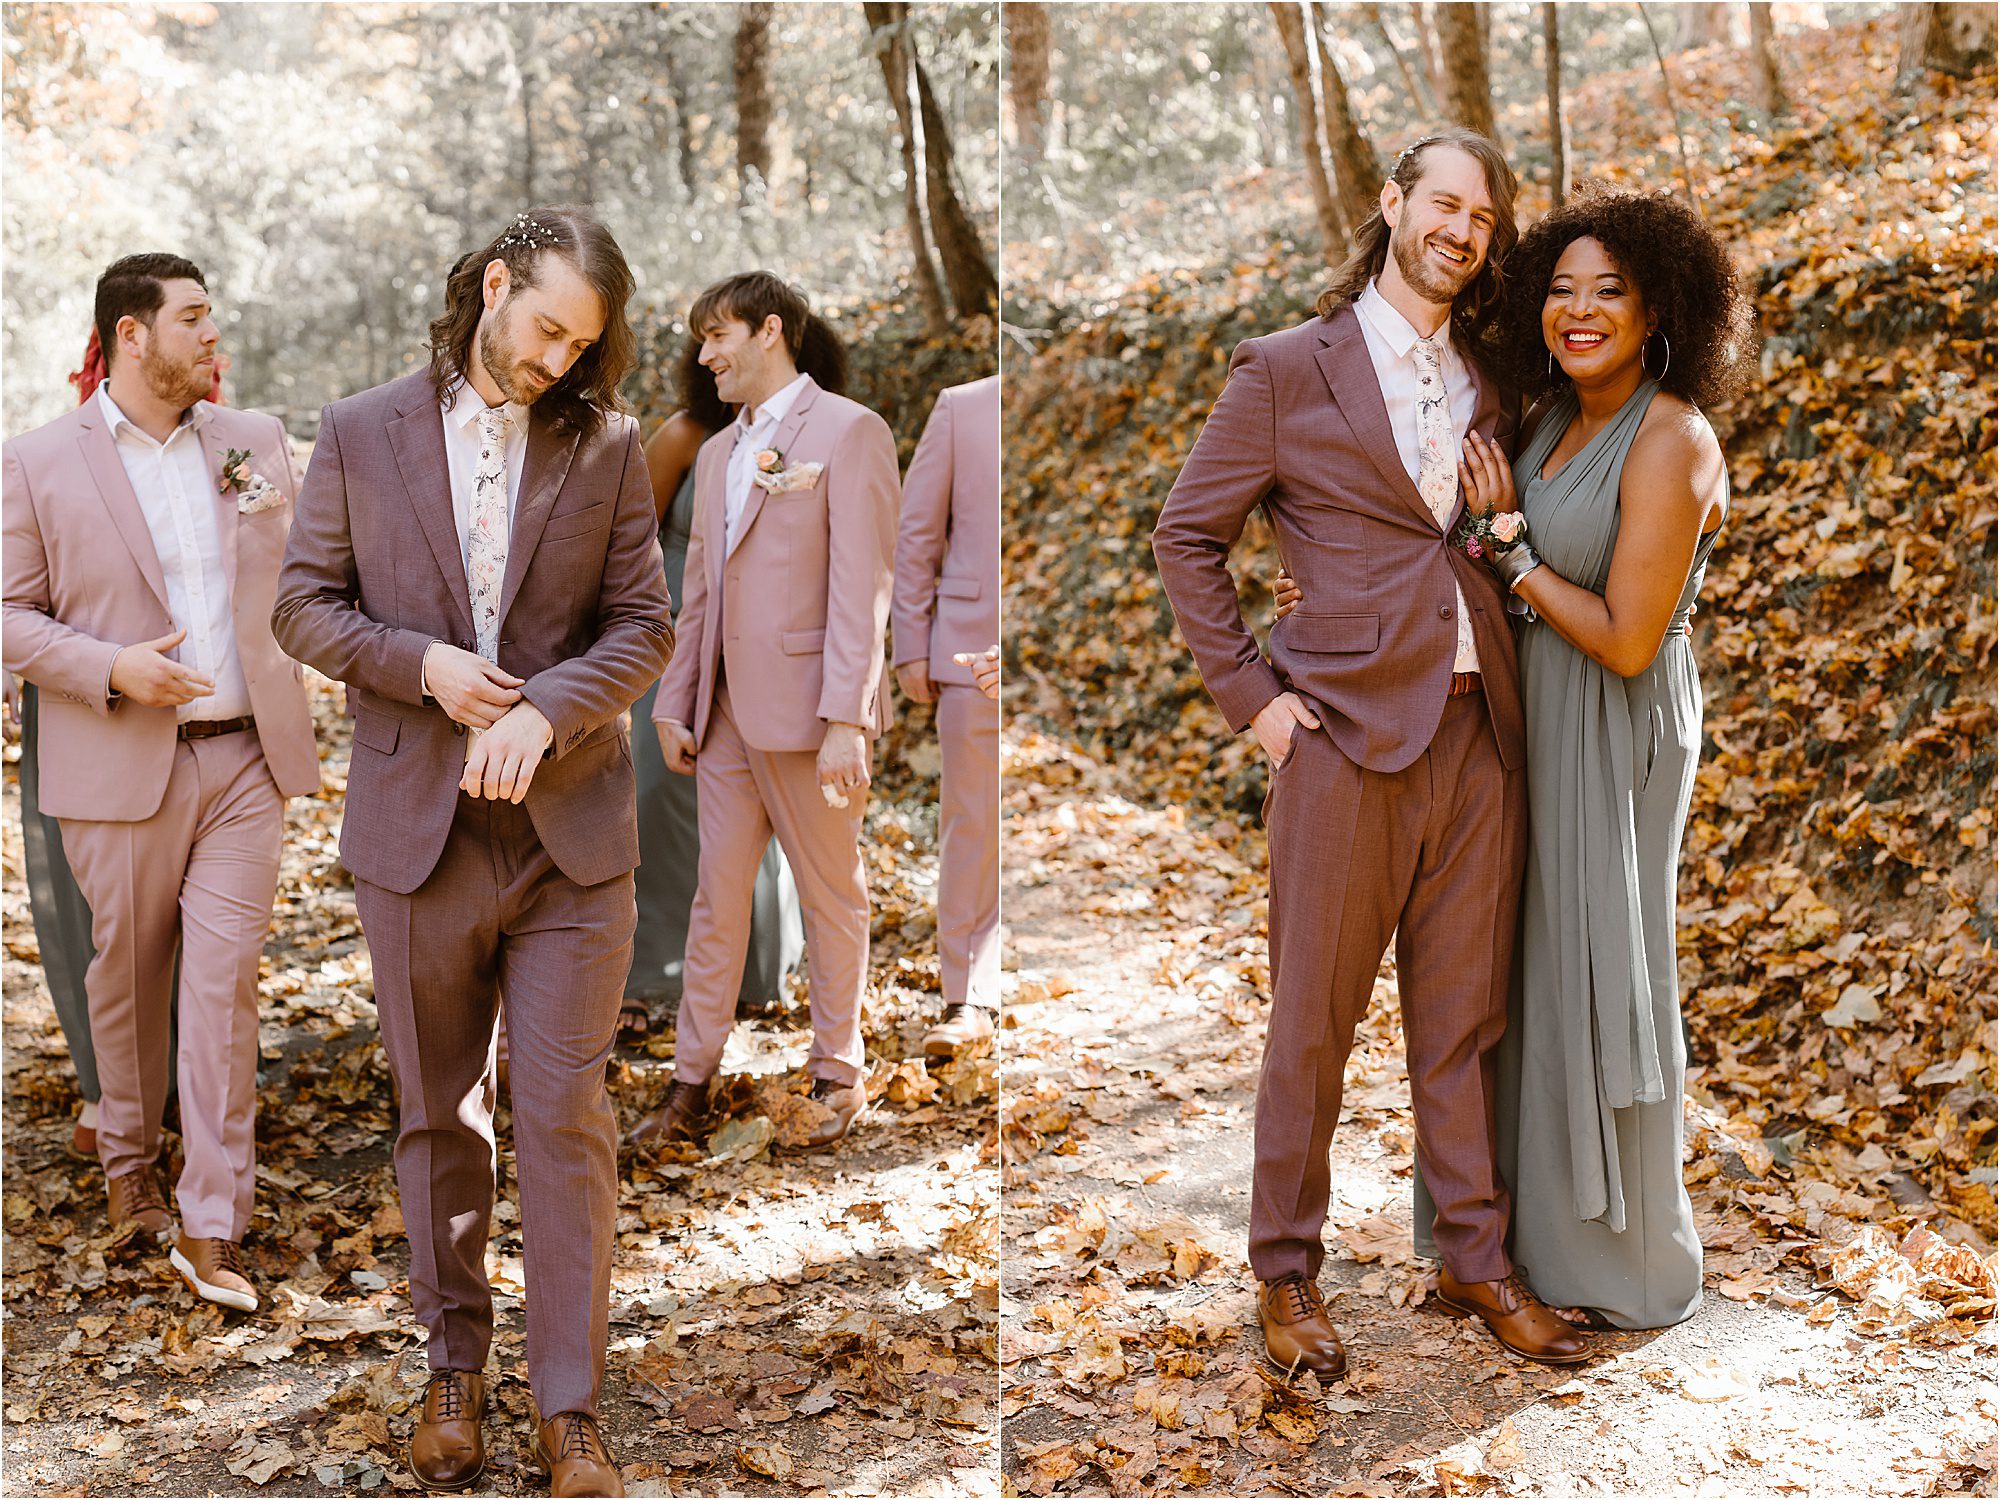 groom walks with groomsmen in pink suits and stands with woman in light green bridesmaid dress